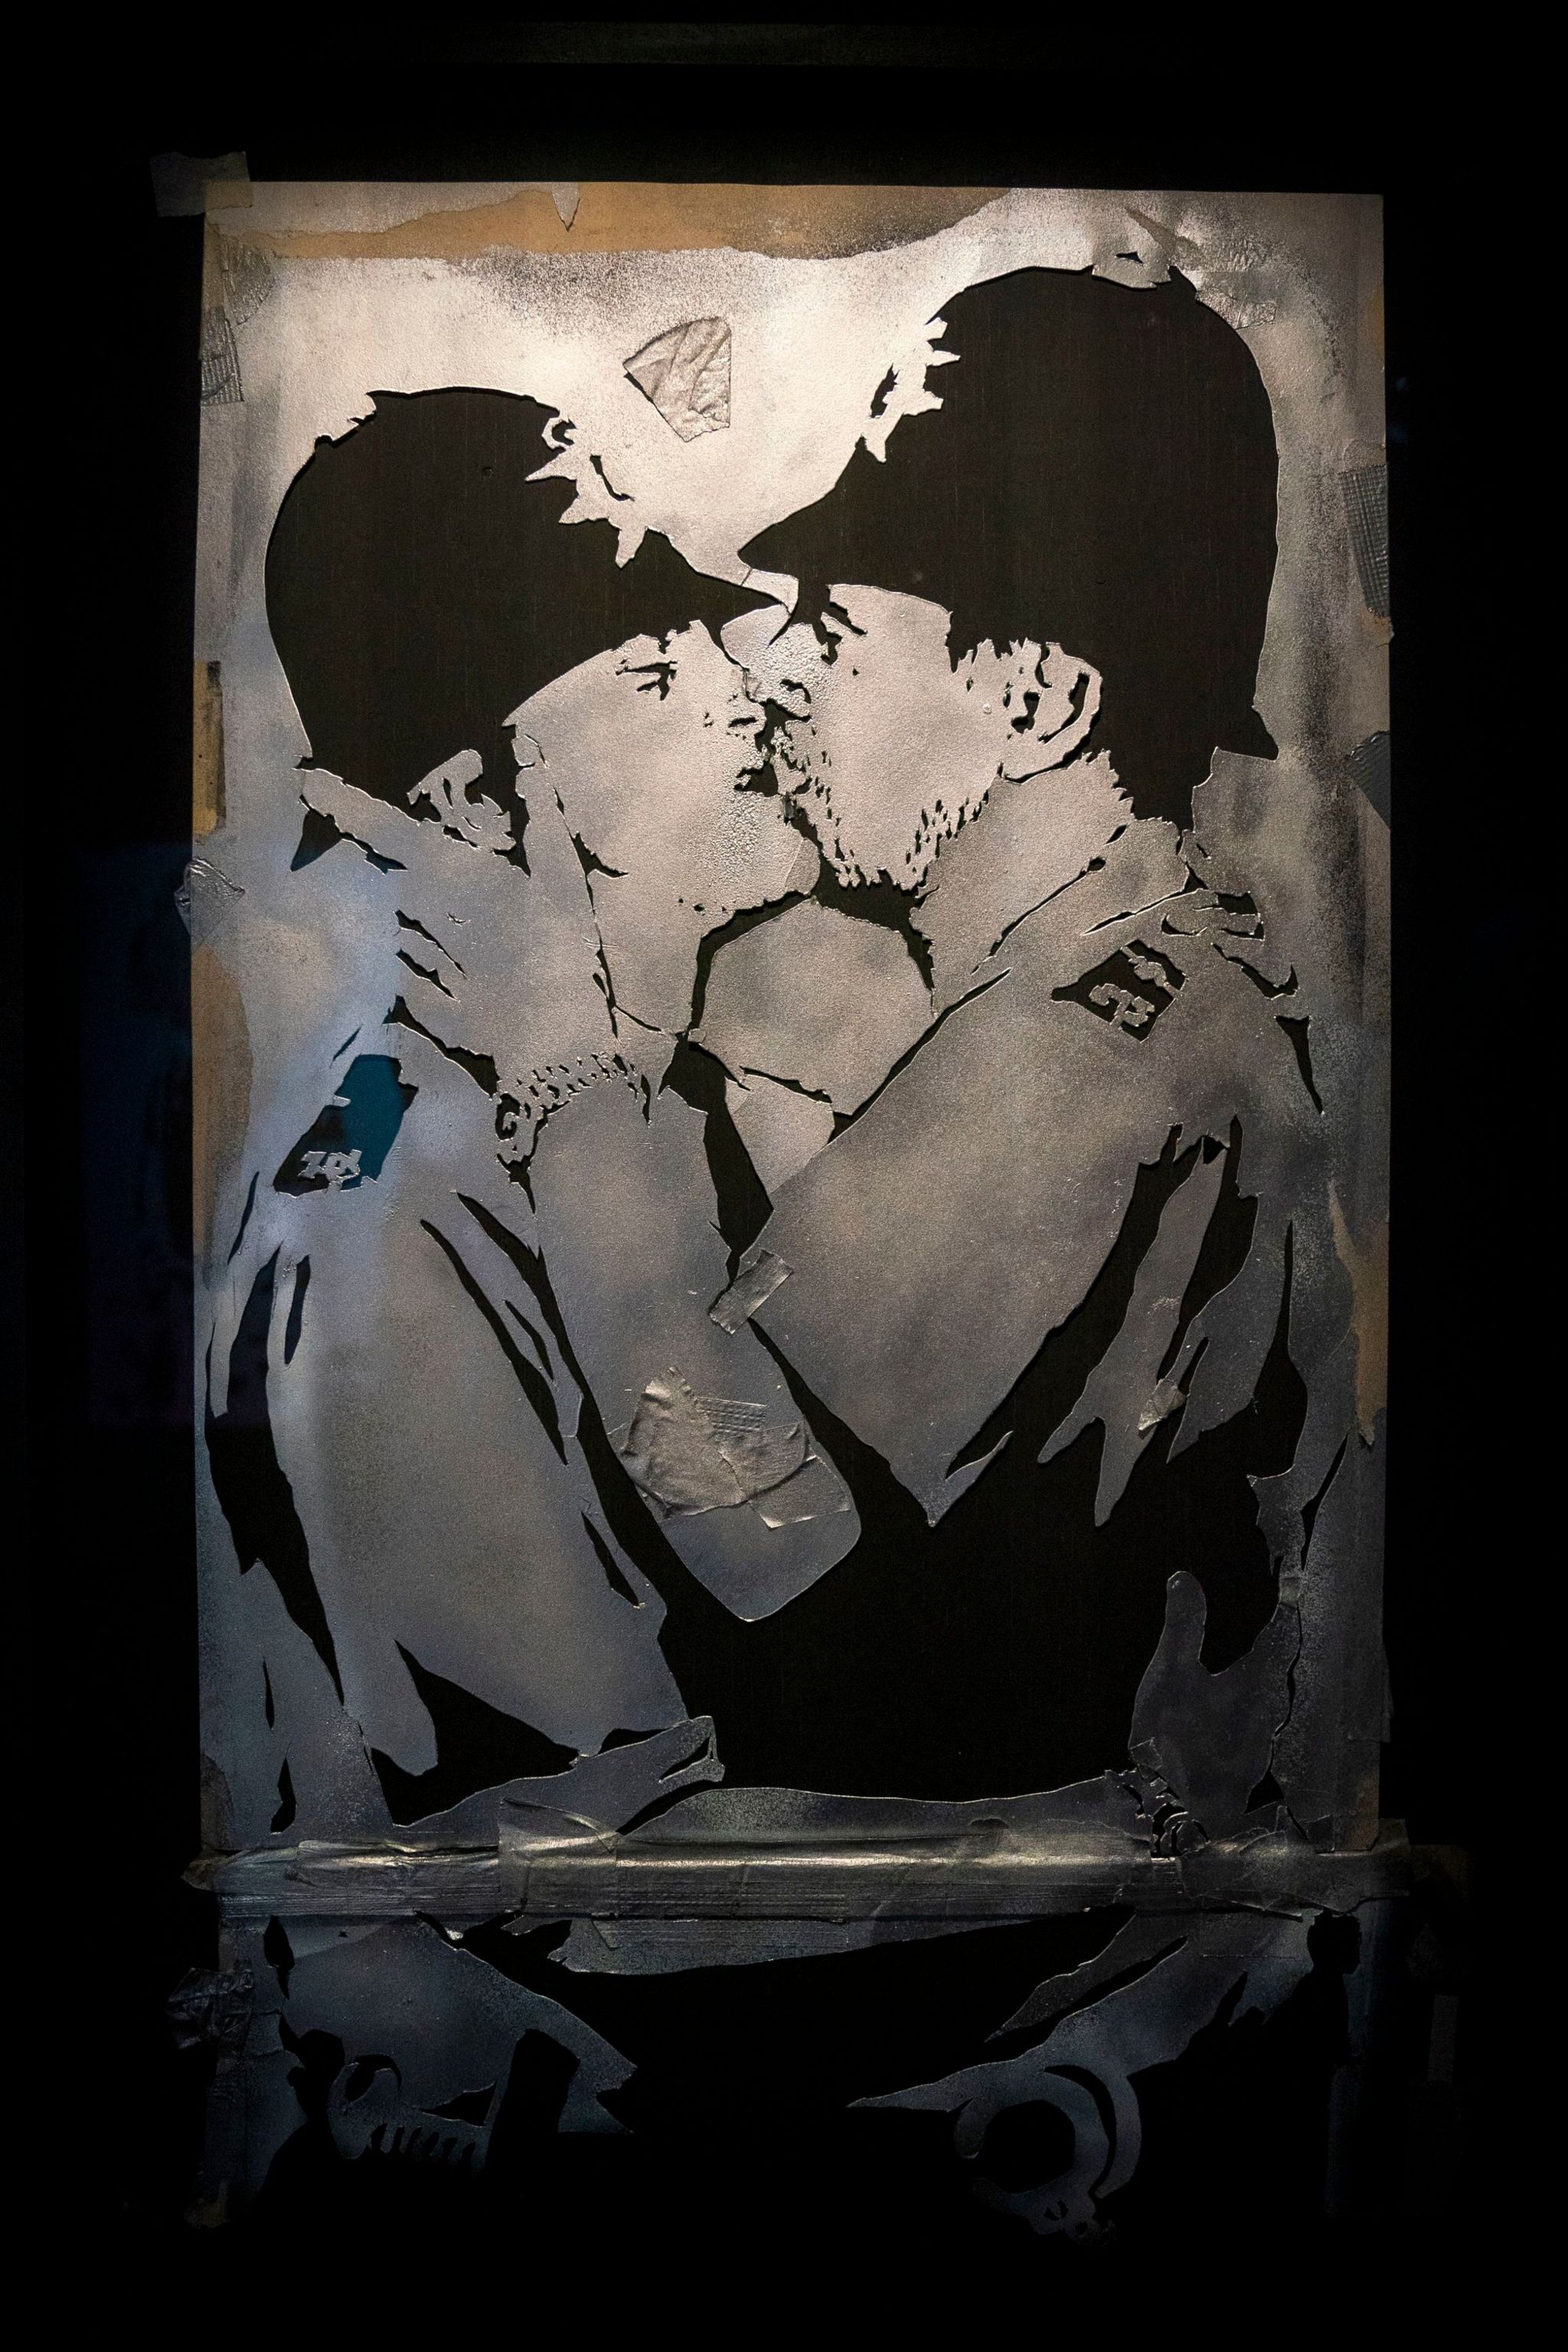 tencil featuring kissing policemen in the new show by artist Banksy 'Cut & Run' which opens this Sunday at Glasgow's GoMA